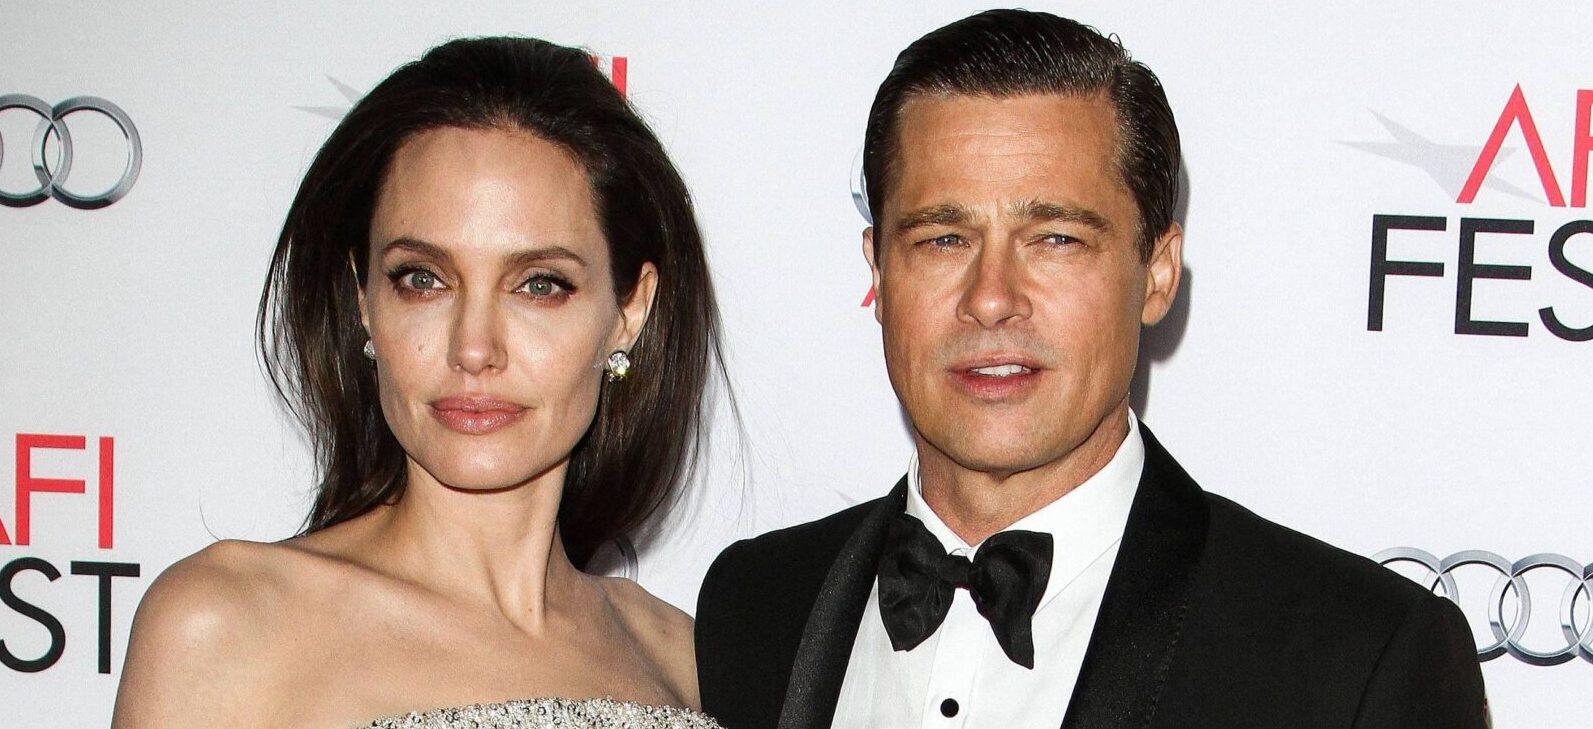 Angelina Jolie Calls For Special Training For Judges Amid Custody Battle With Brad Pitt